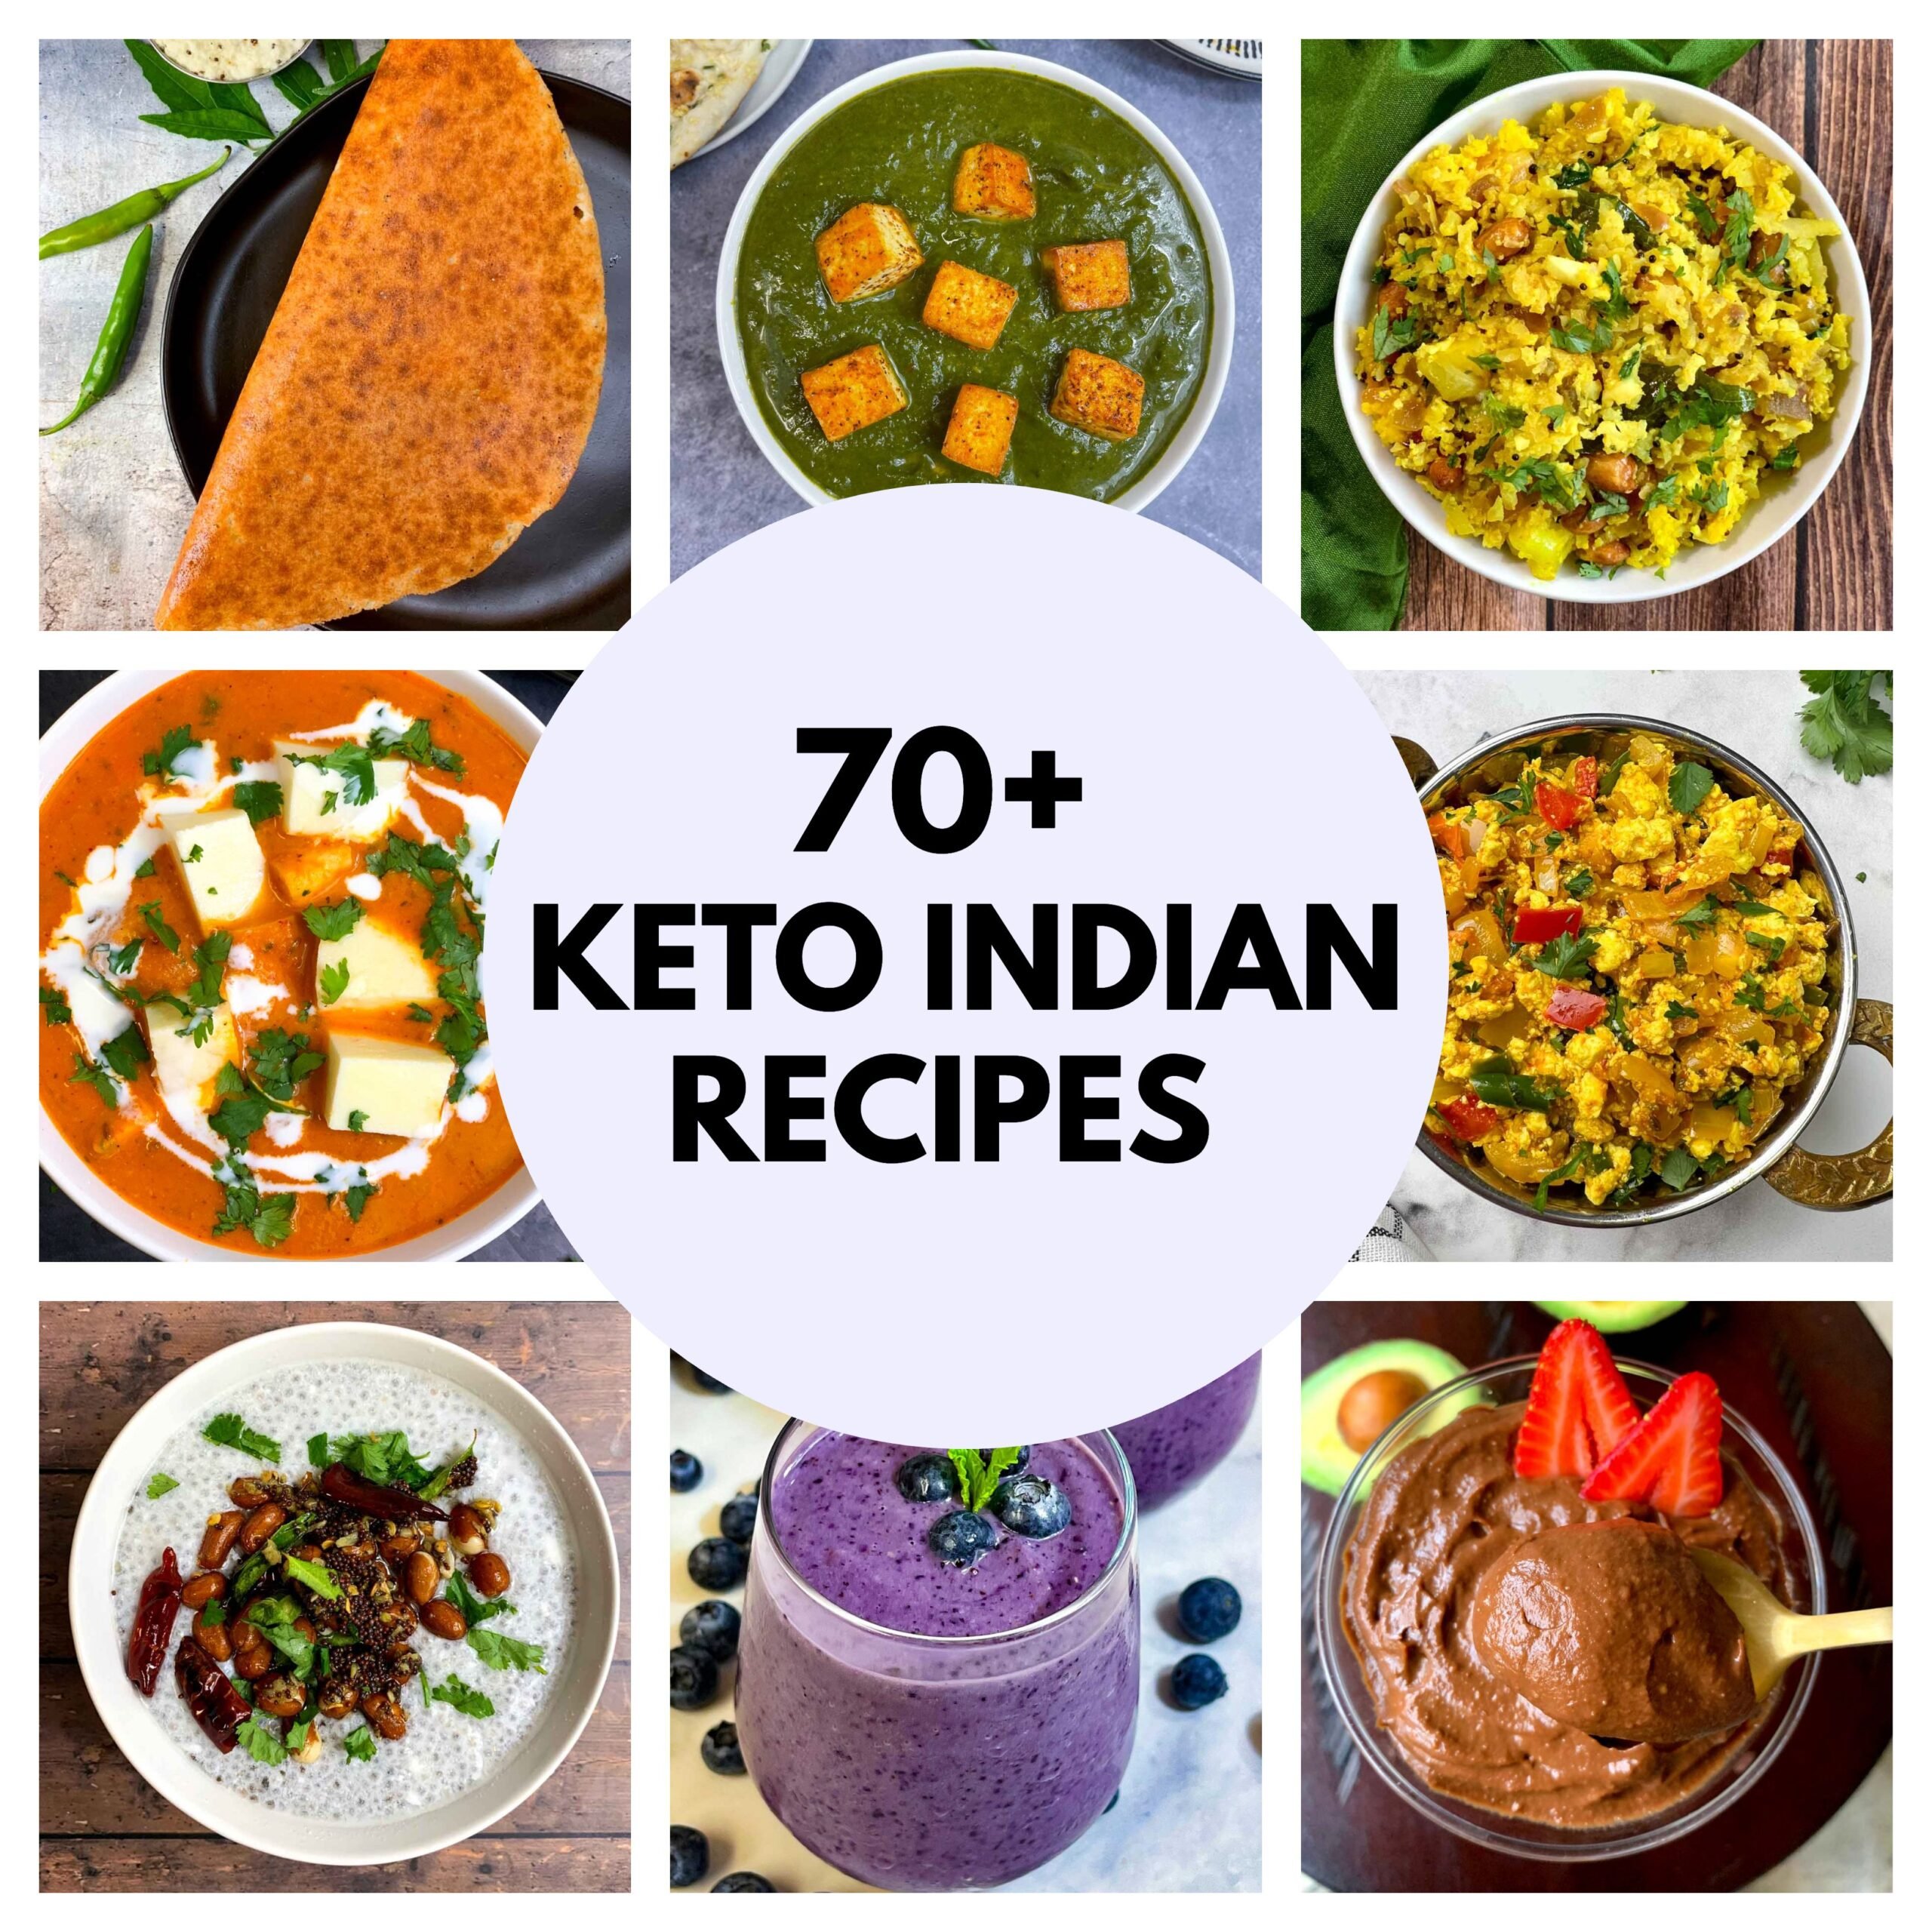 https://www.indianveggiedelight.com/wp-content/uploads/2019/11/70-keto-indian-recipes-featured-scaled.jpg